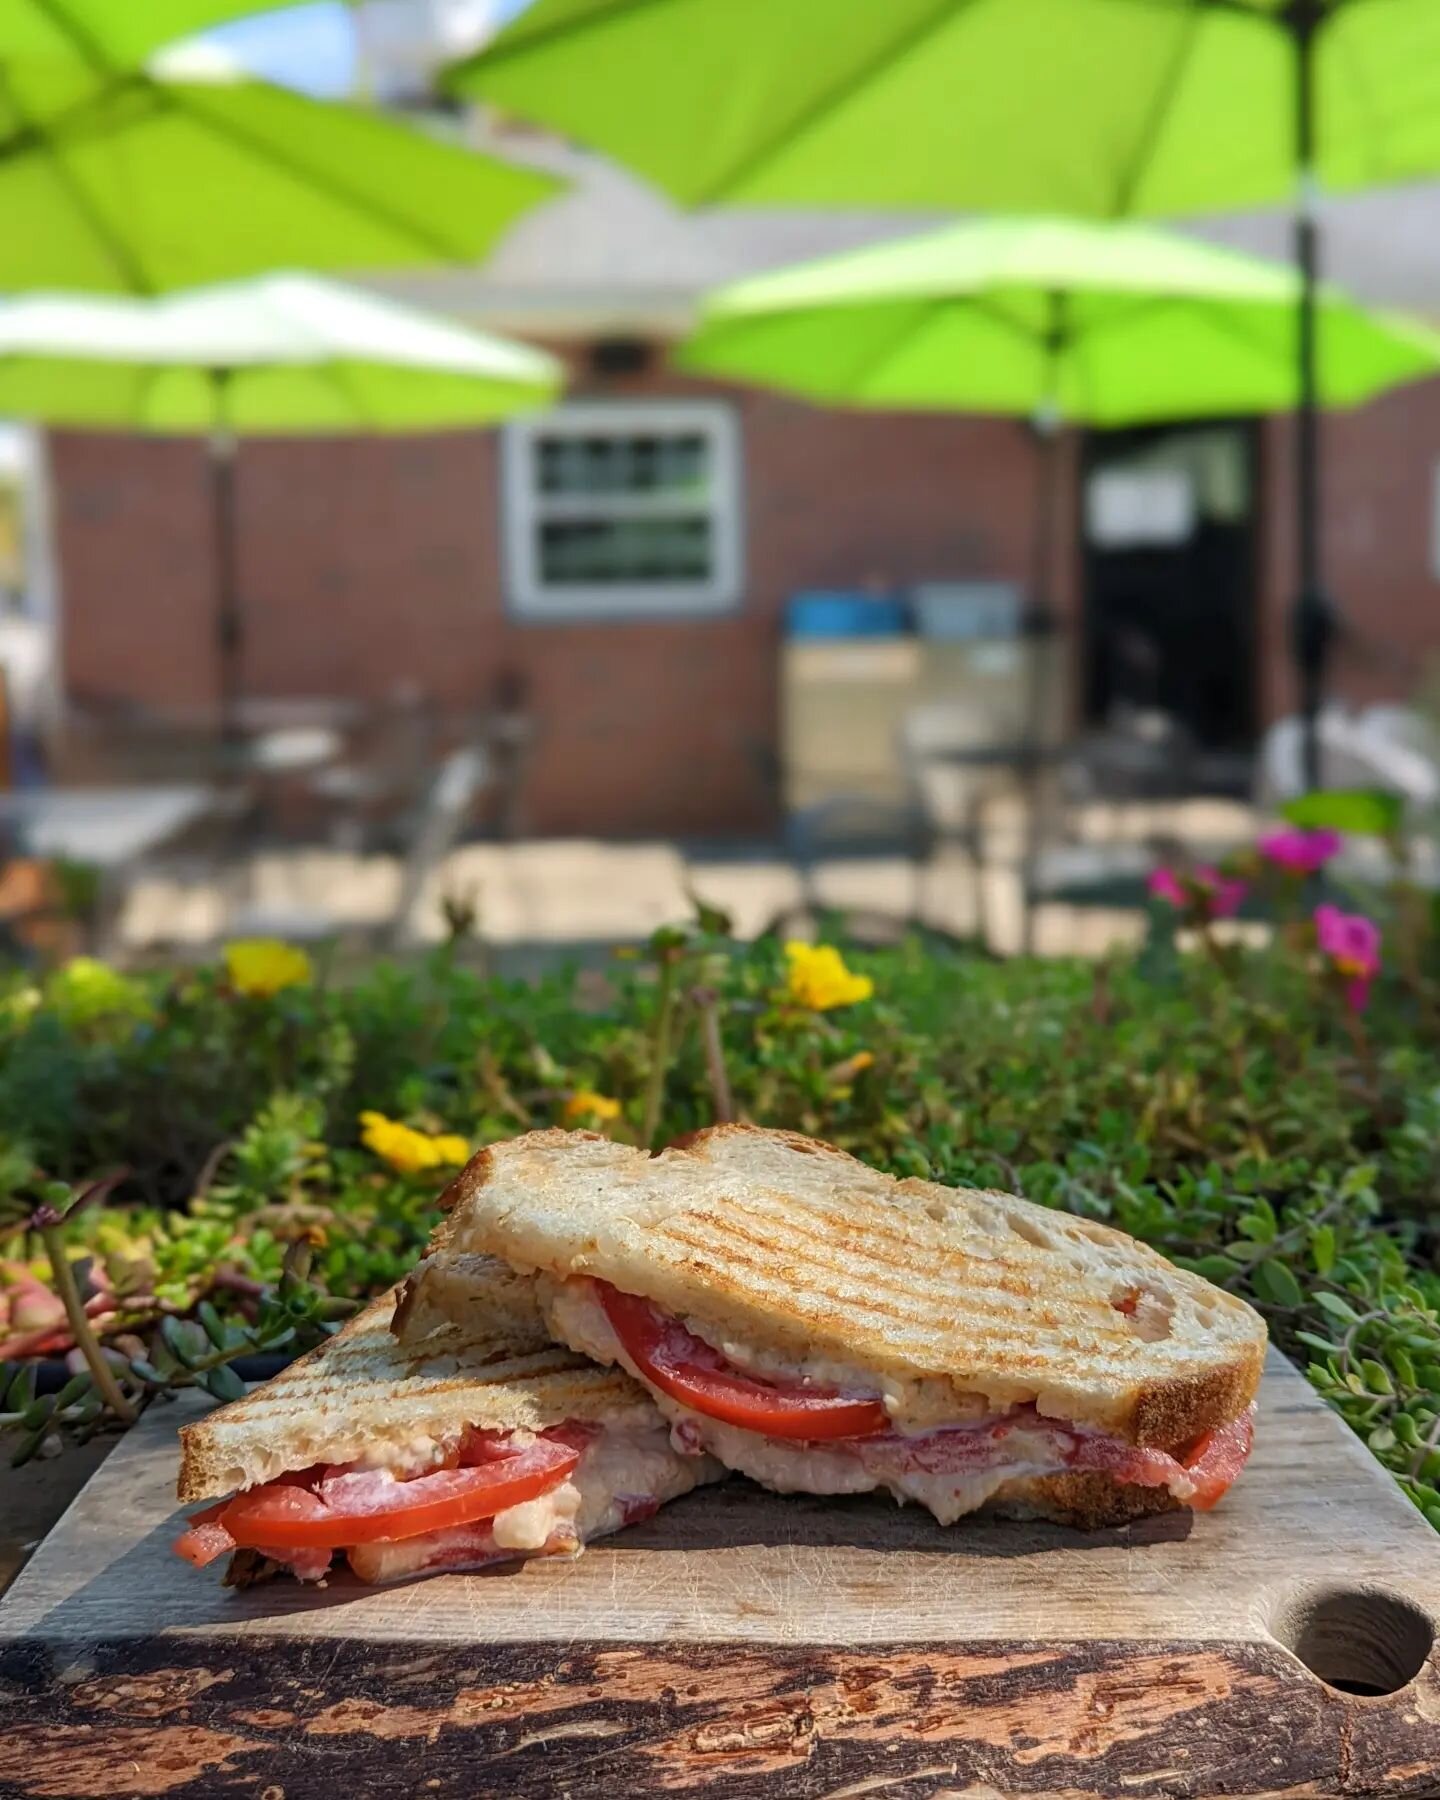 Happy Monday everyone! This week's meatless monday special is the Pimento Panini! It comes with house-made pimento cheese and locally grown tomatoes, panini-pressed on @dclyonbakery sourdough bread. Our soups of the moment are Creamy Tomato, and Chic